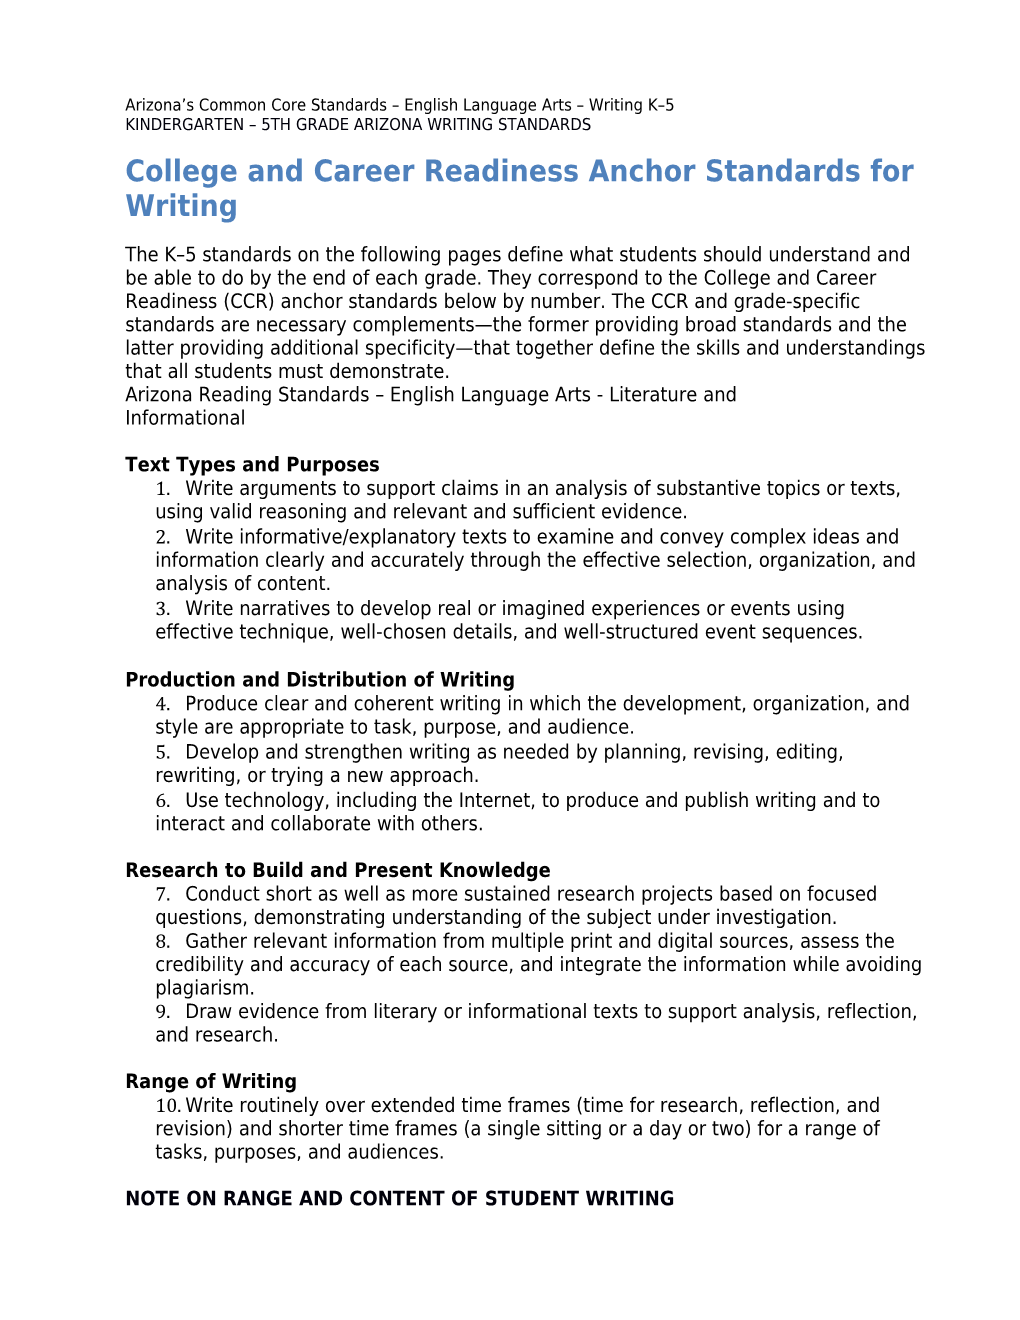 College and Career Readiness Anchor Standards for Writing